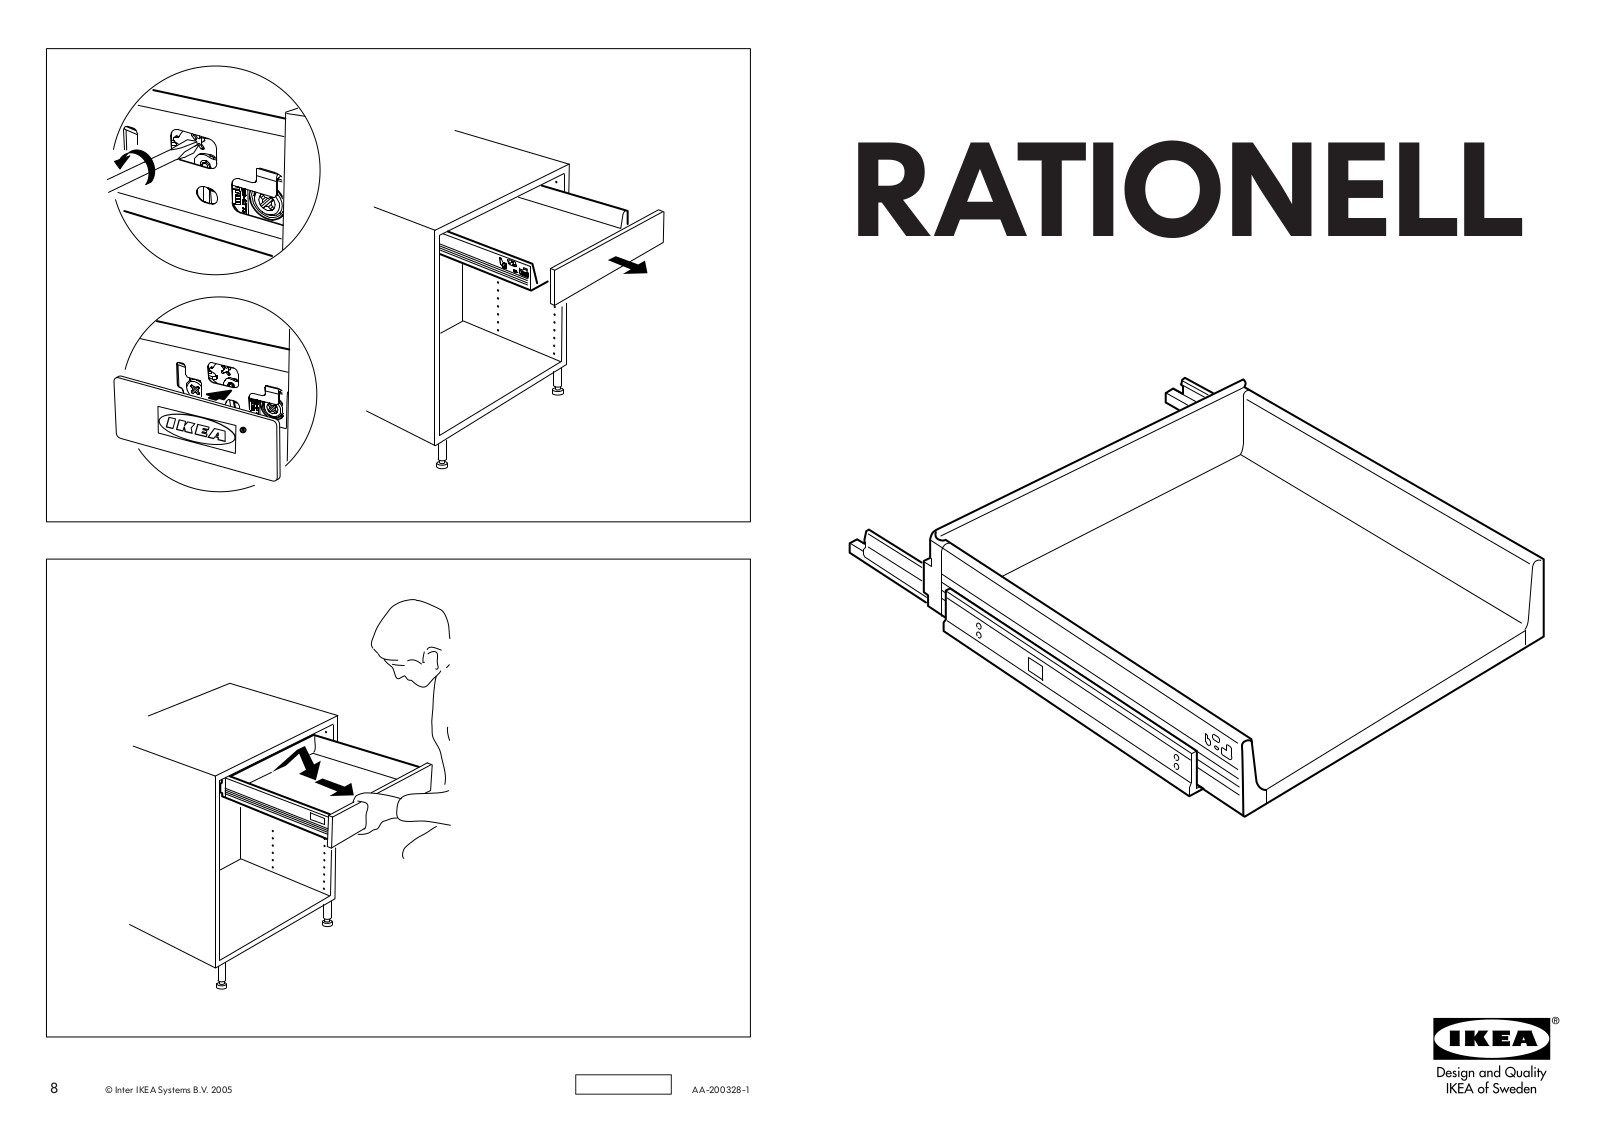 Ikea RATIONELL ASSEMBLY Manual